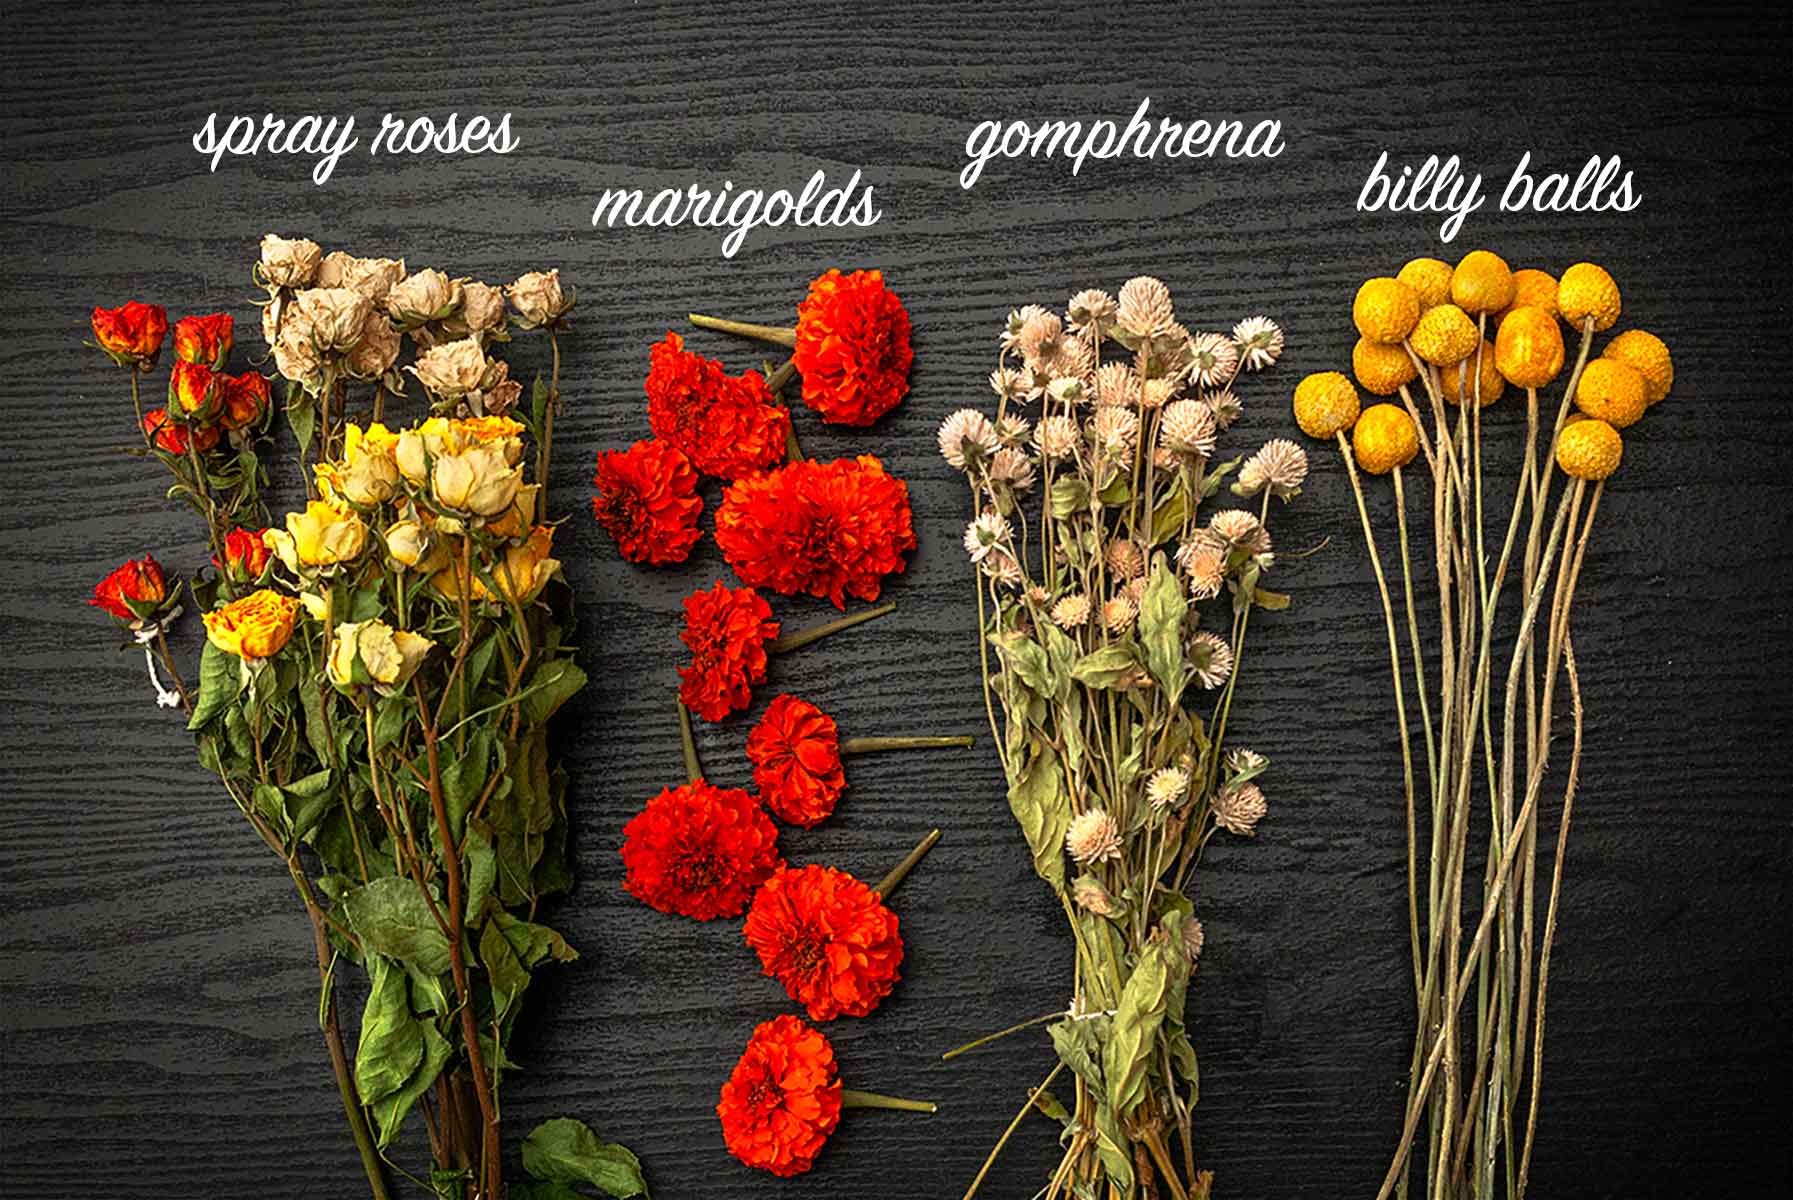 Spray roses, marigolds, gomphrena and bily balls on a table with labels describing what the are.